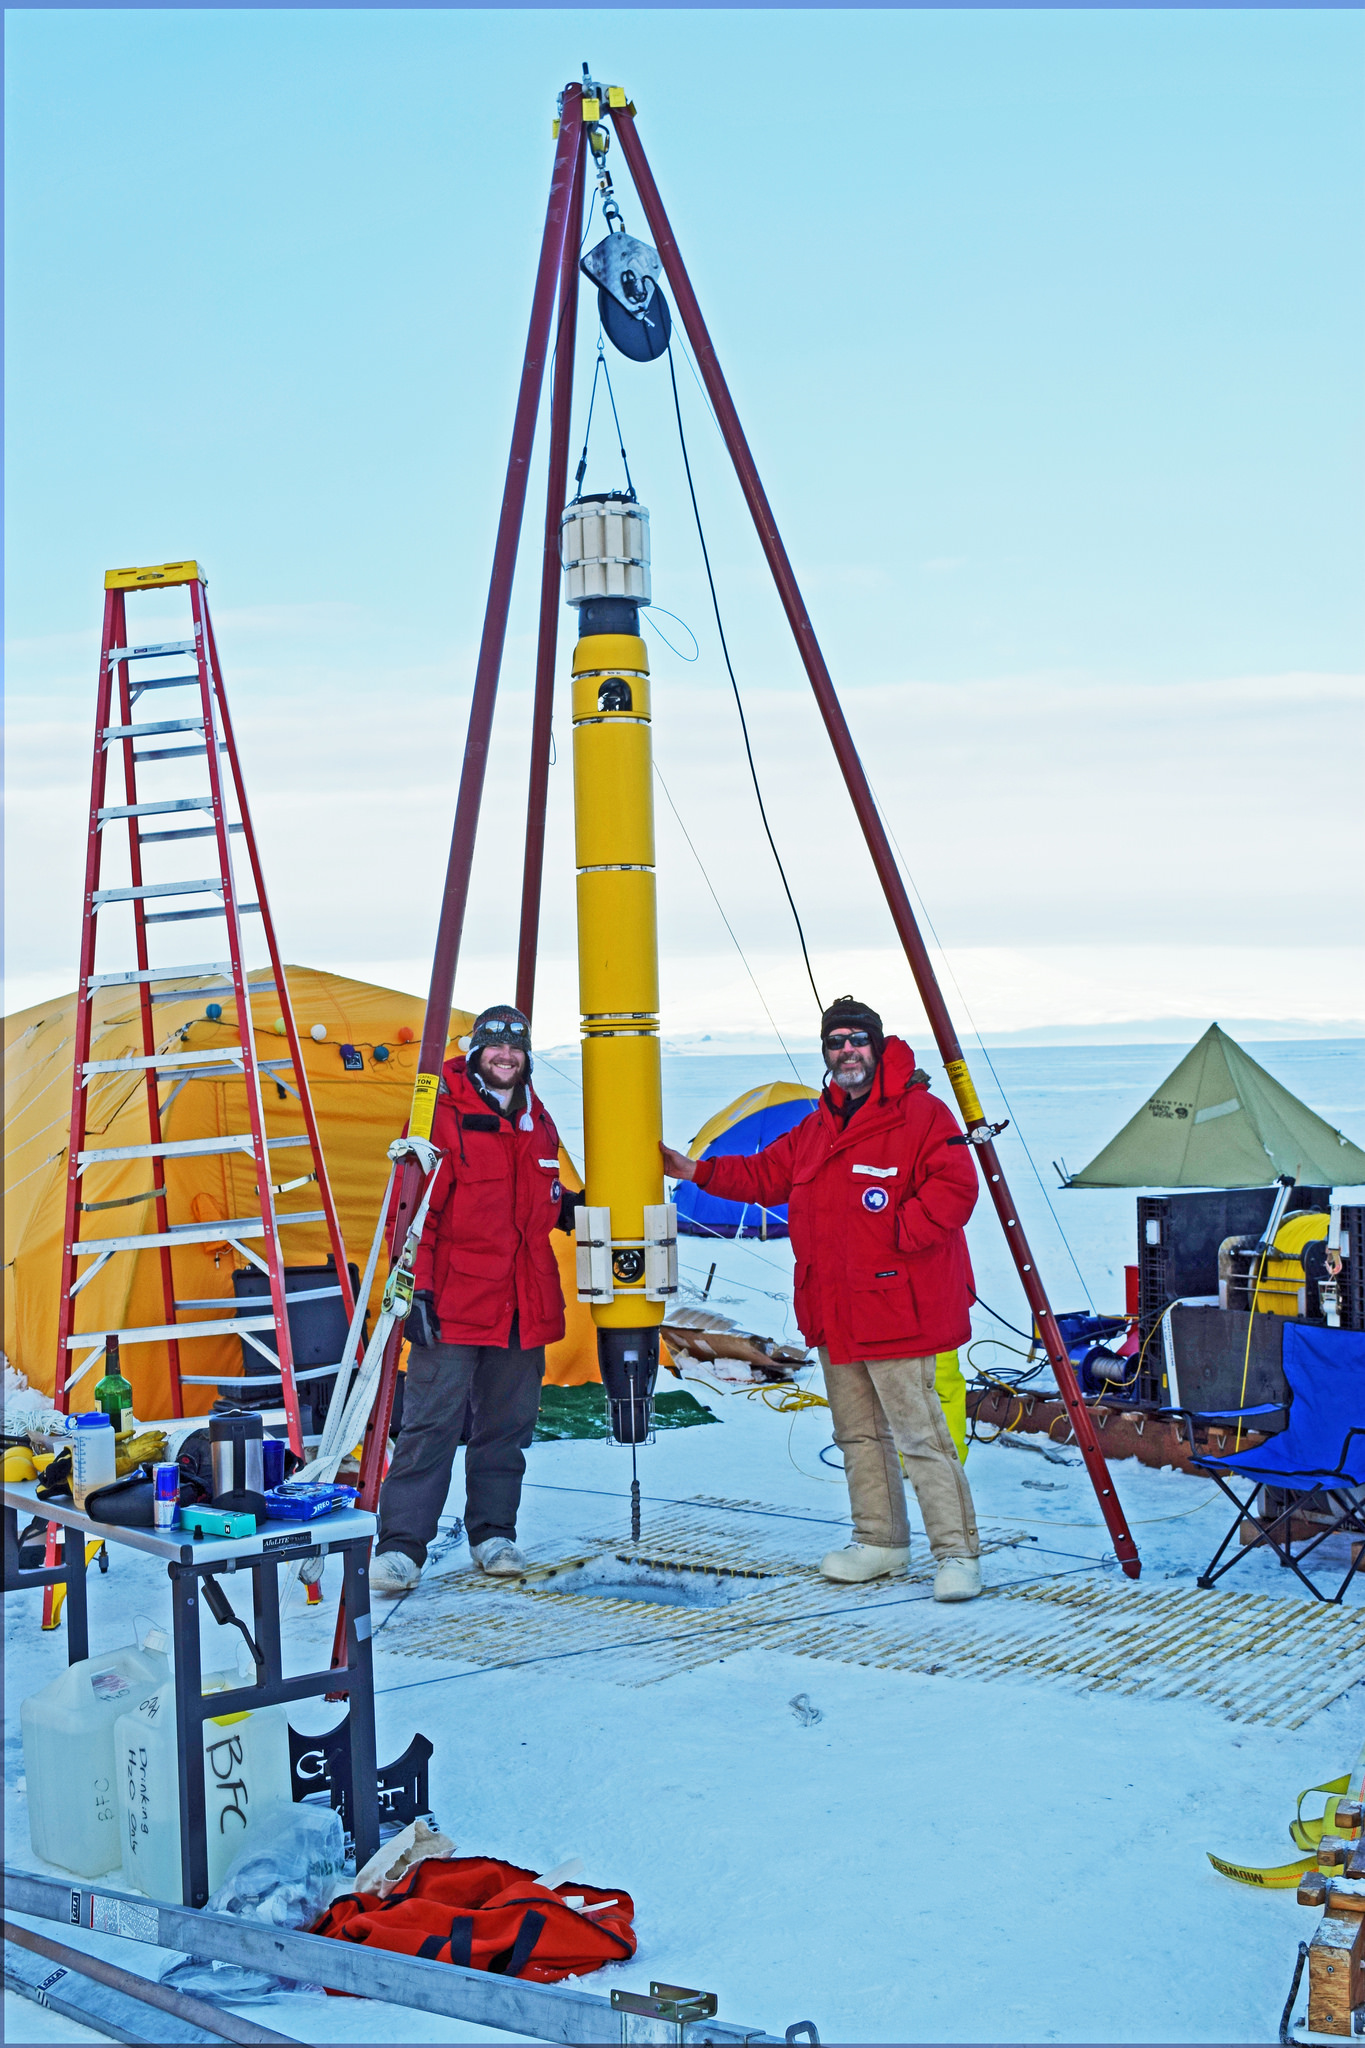 Matt Meister, a research assistant at GTRI, and Mick West, moments before deploying Icefin. Photo: Jacob Buffo.